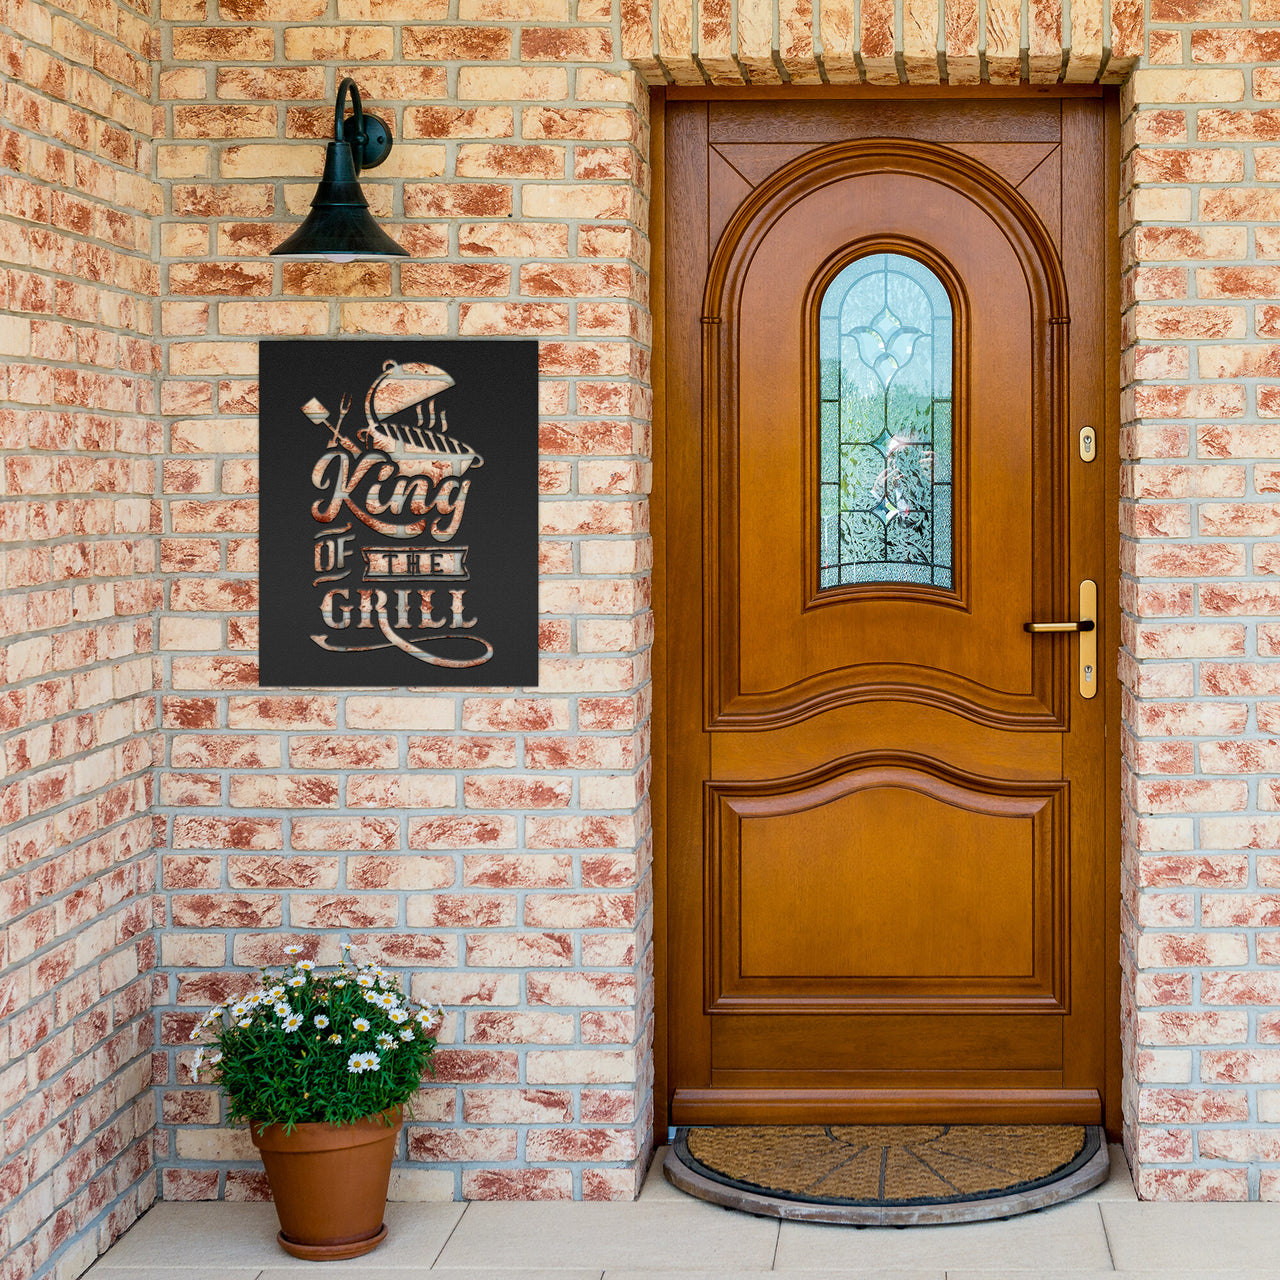 King of the grill, grill and text design on wall , front door